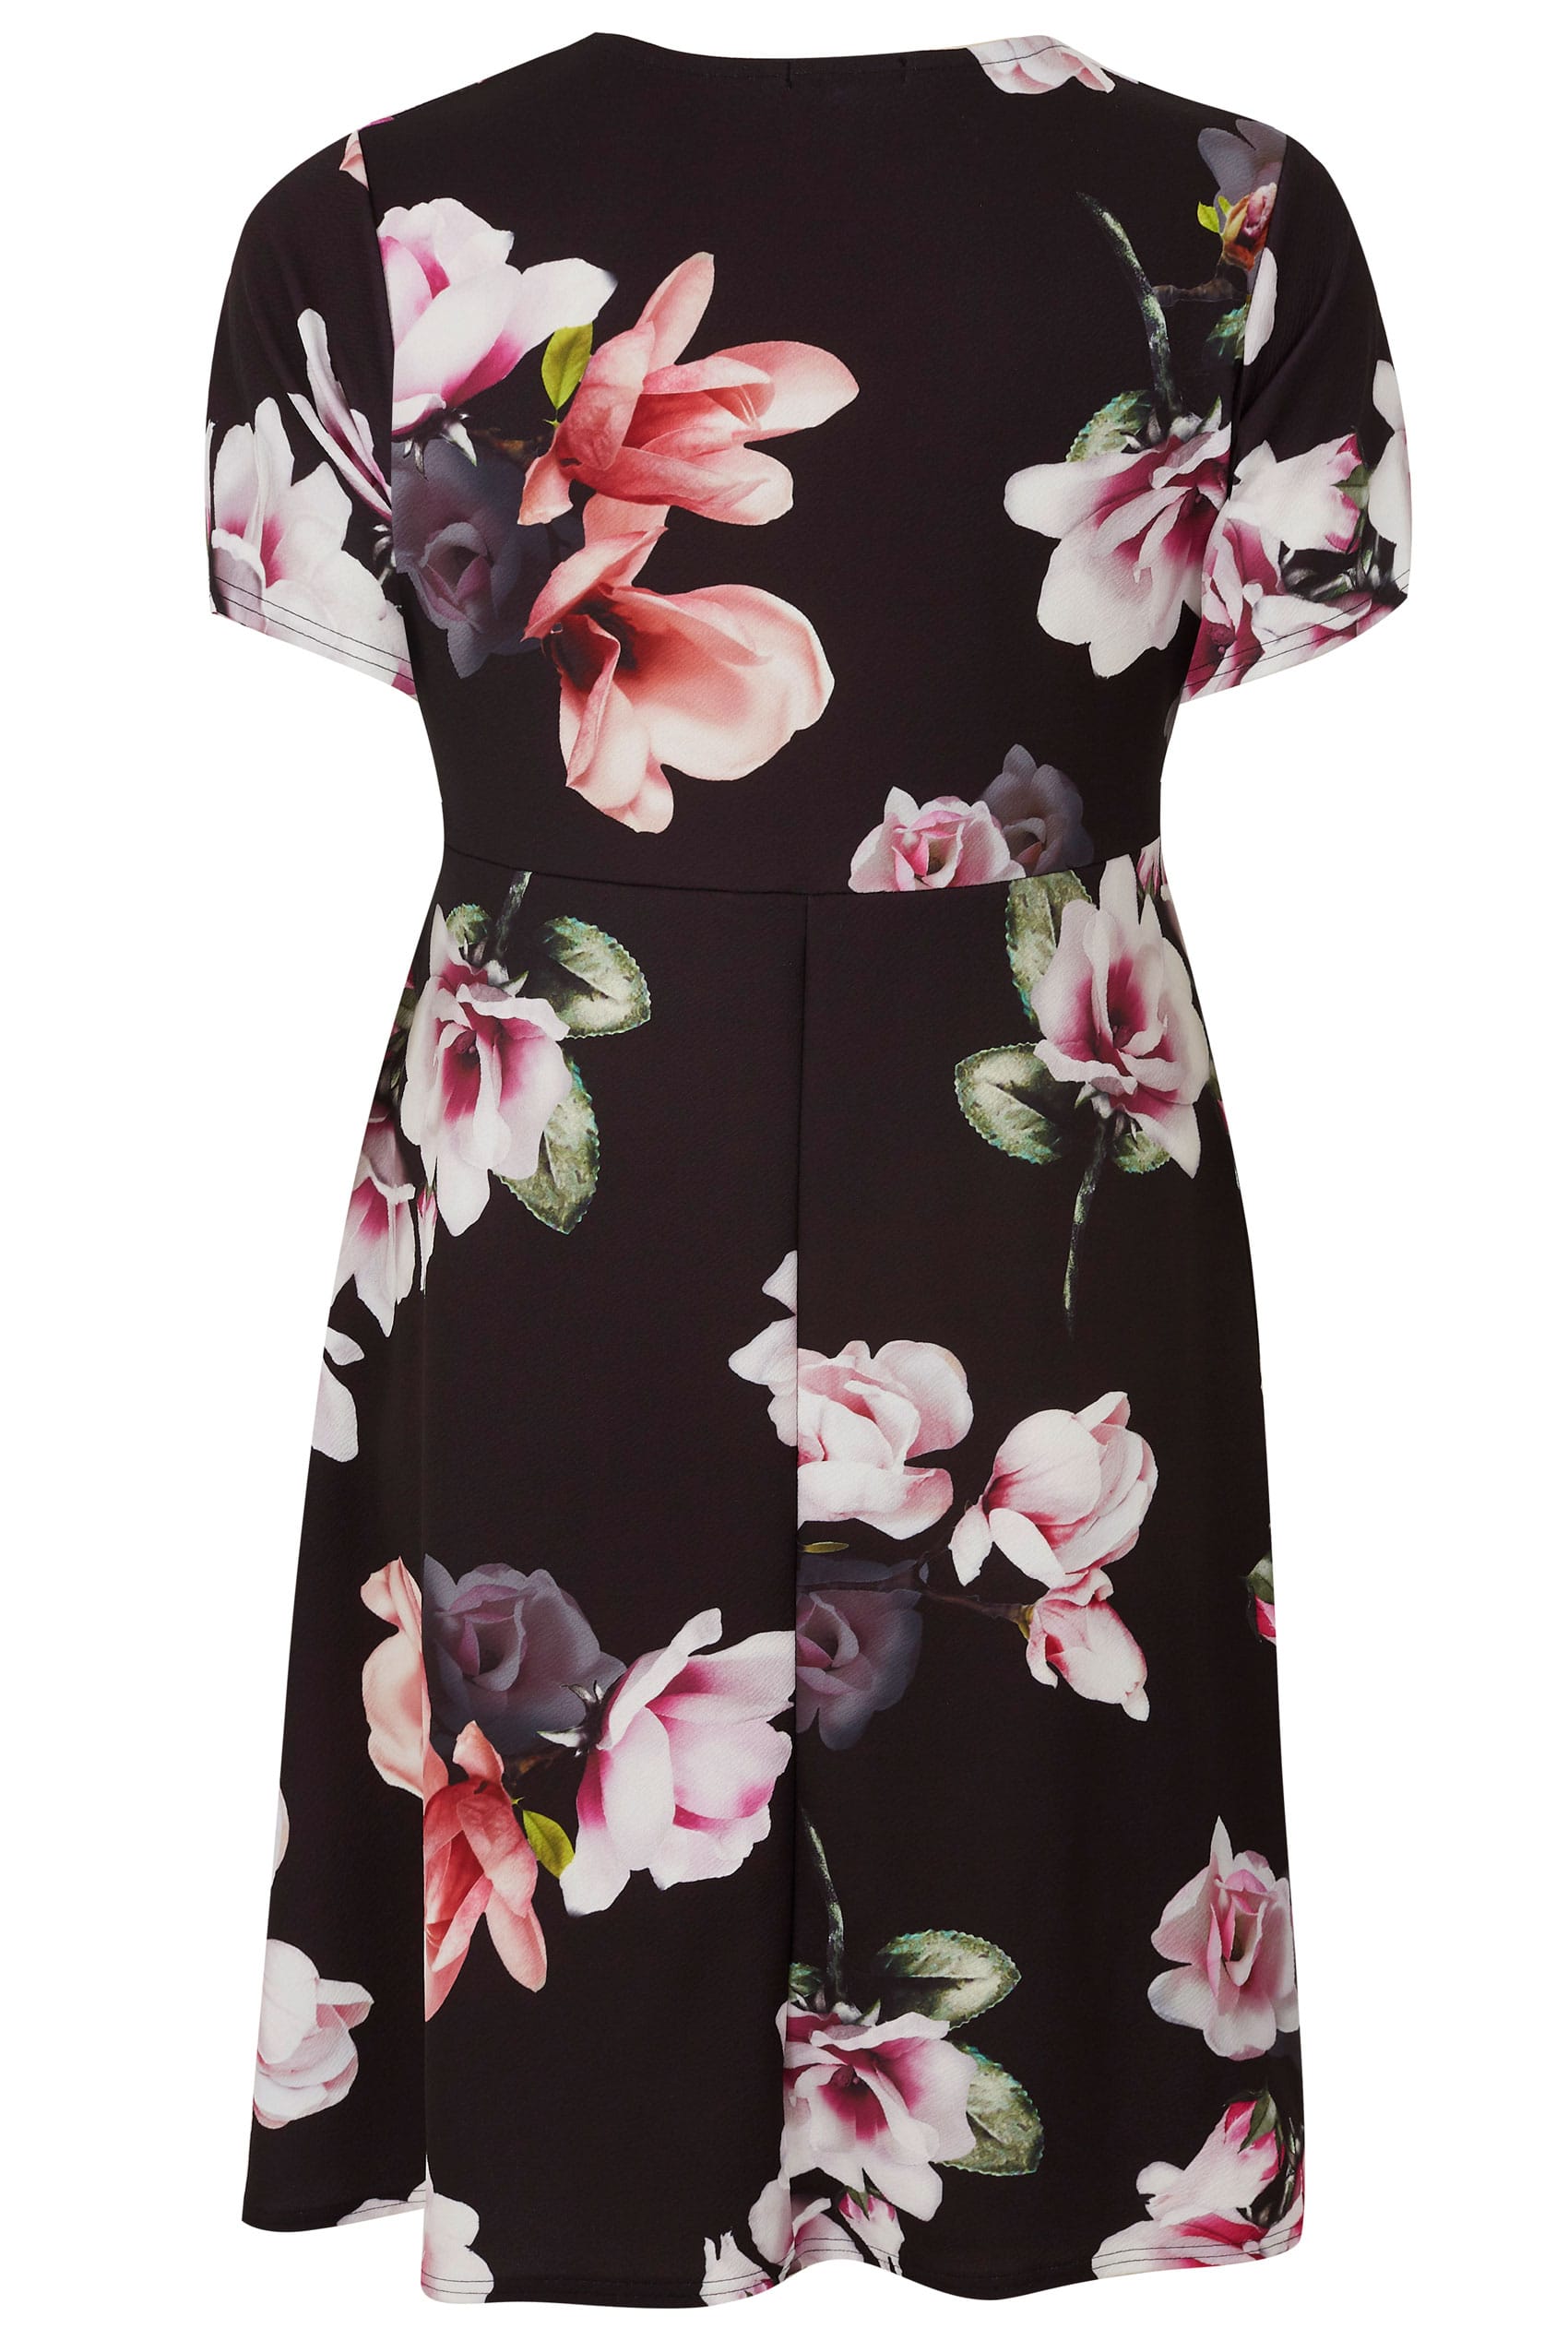 Black And Multi Floral Wrap Dress Plus Size 16 To 36